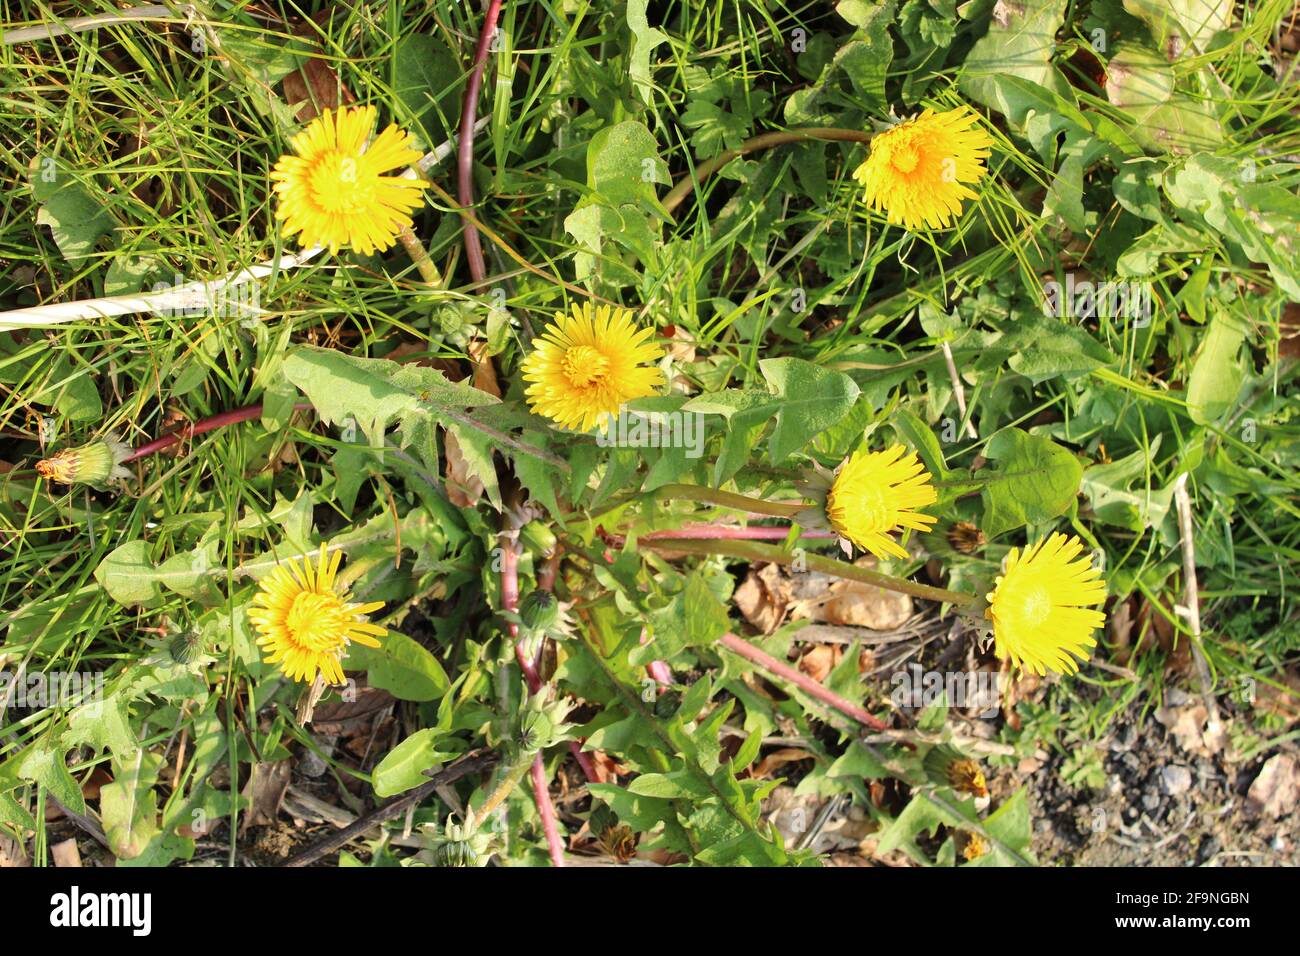 Taraxacum officinale Dandelion plant composed of numerous small yellow florets also known as a common weed. Stock Photo